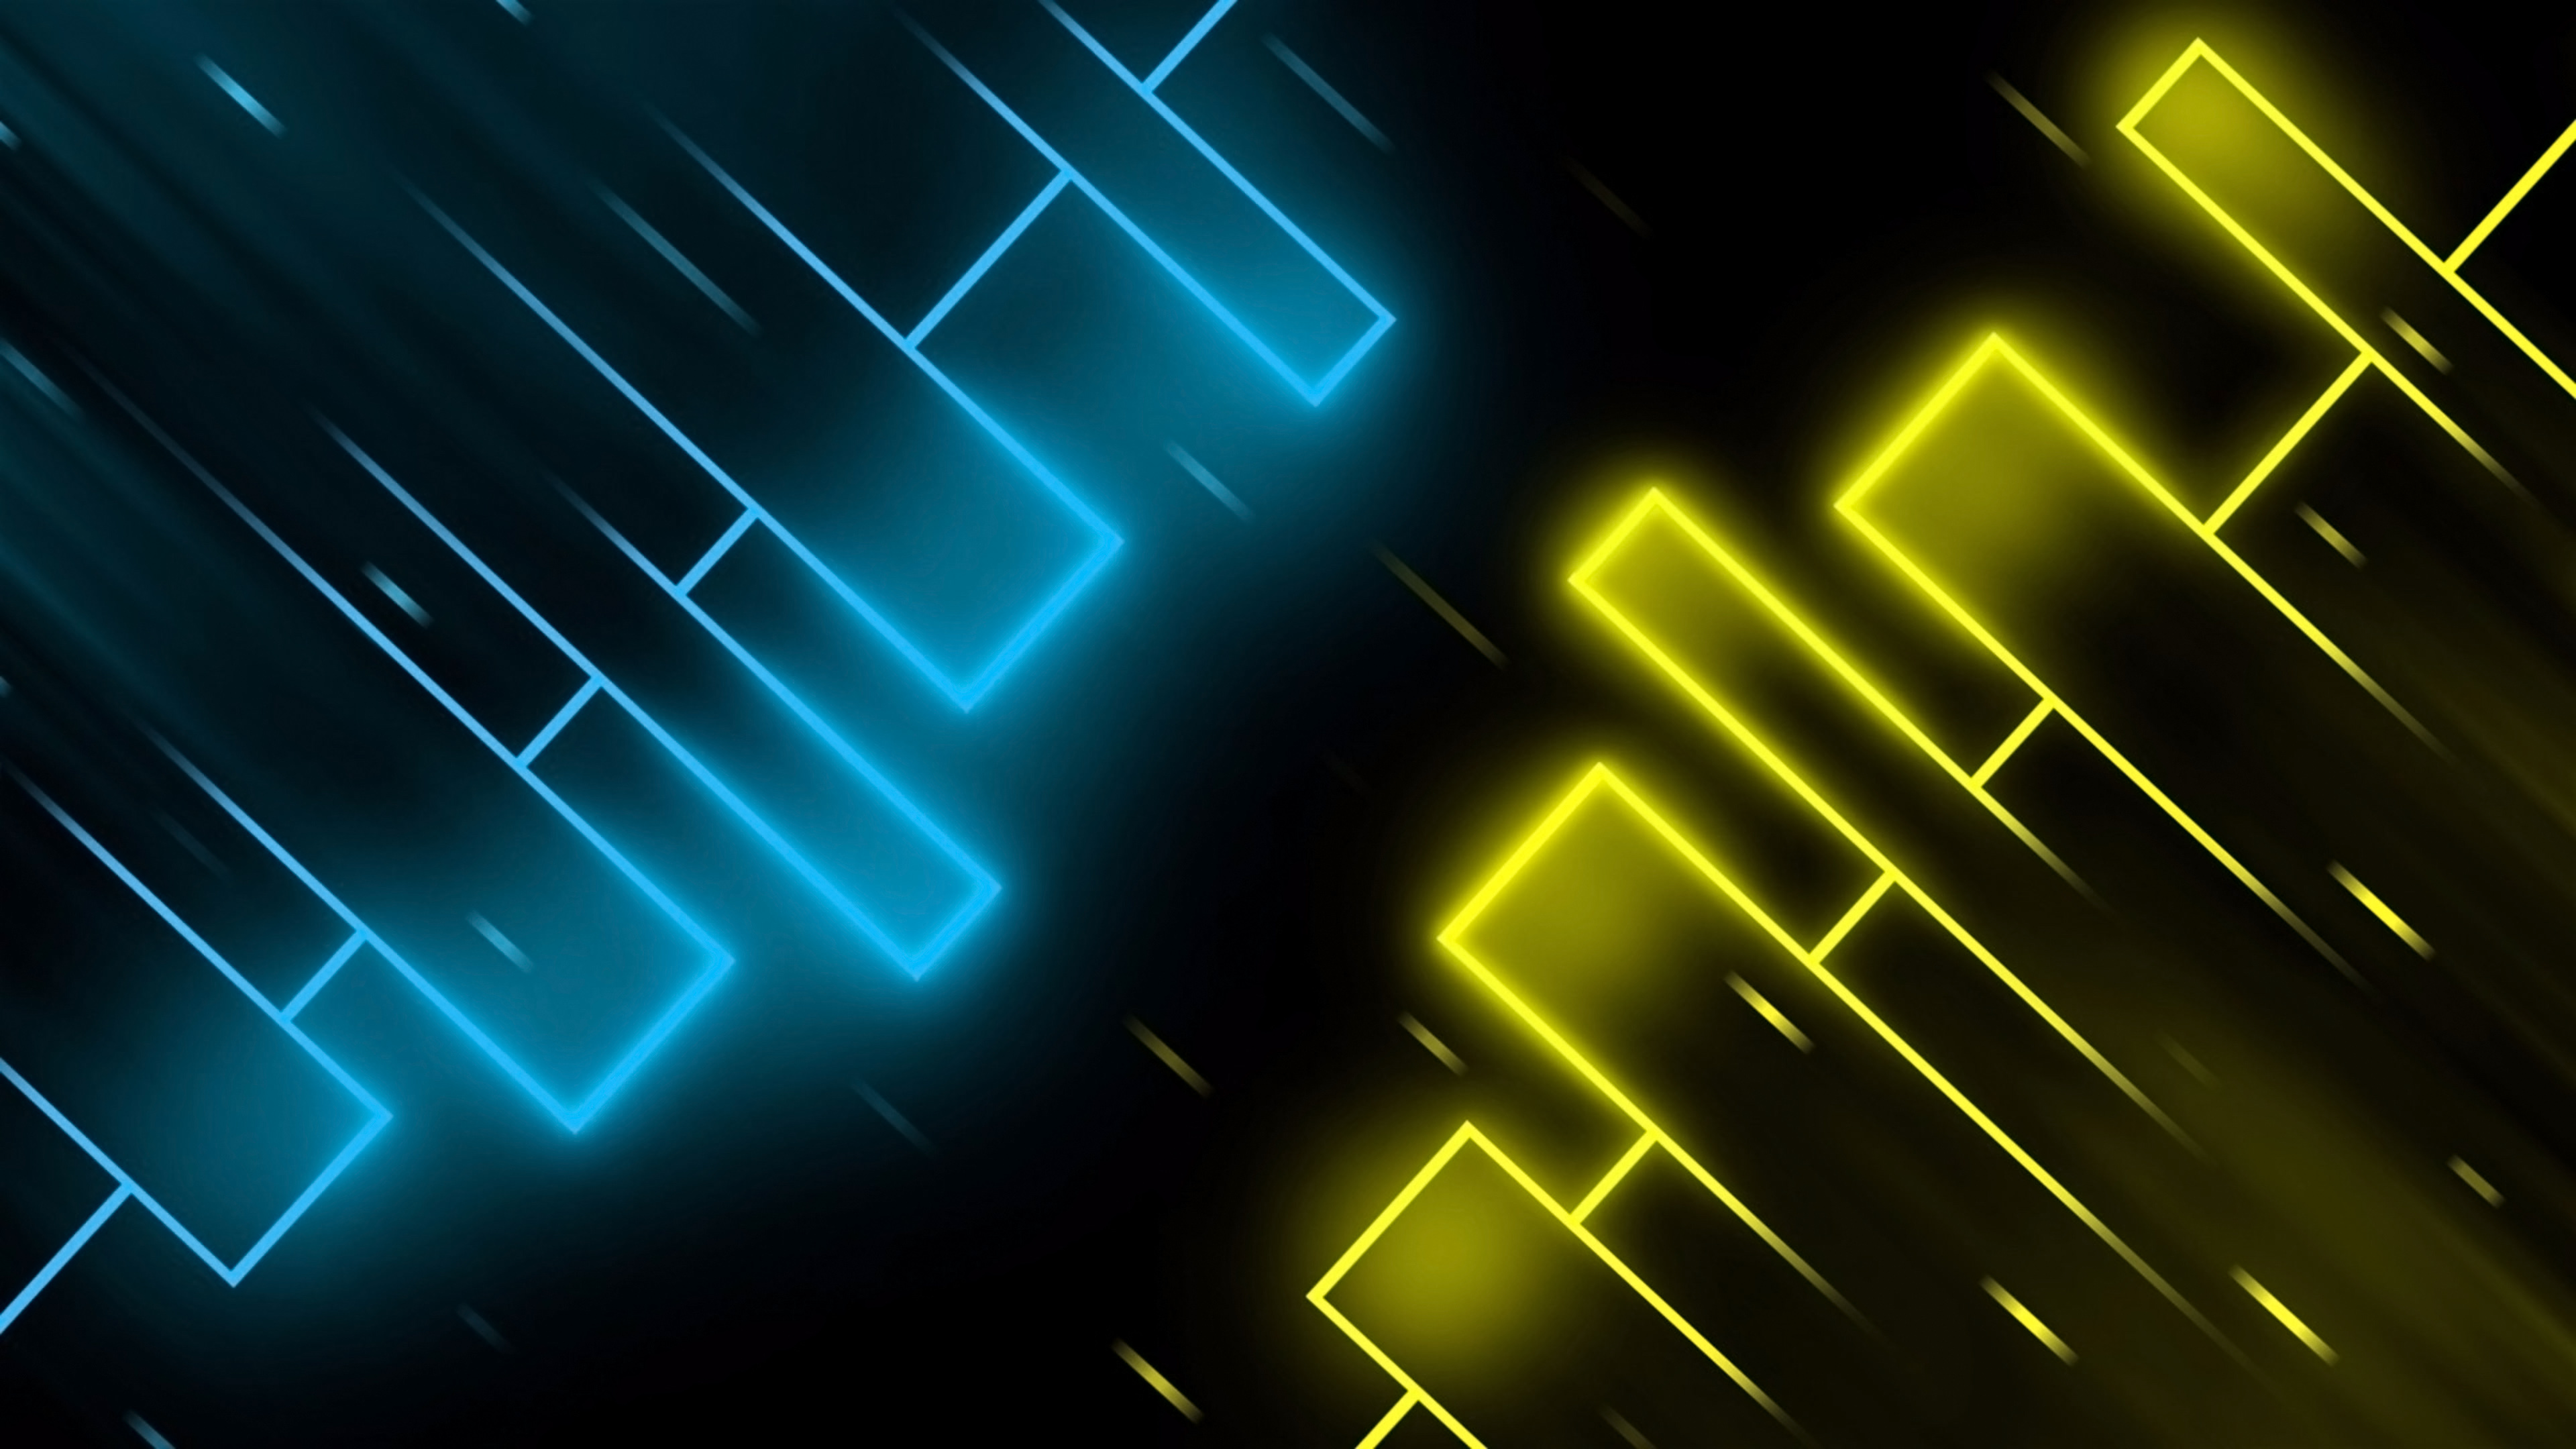 Neon blue and yellow Wallpaper 4k Ultra HD